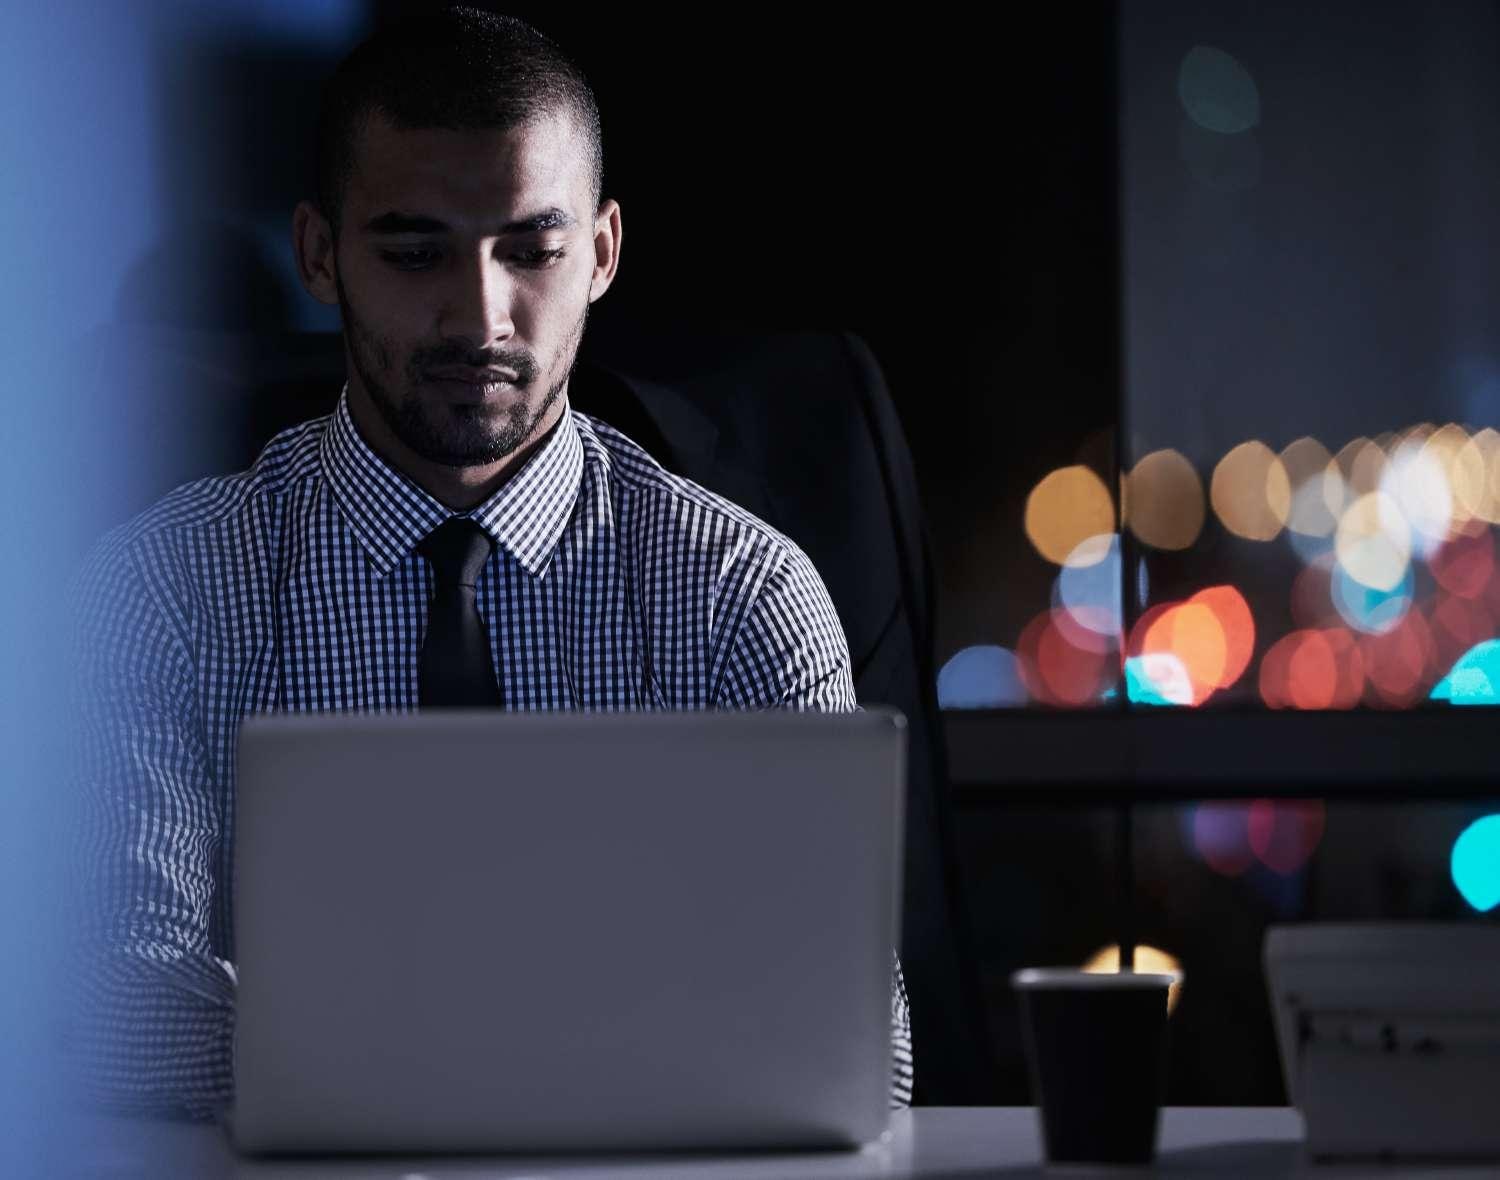 Man with a tie works on a laptop at night